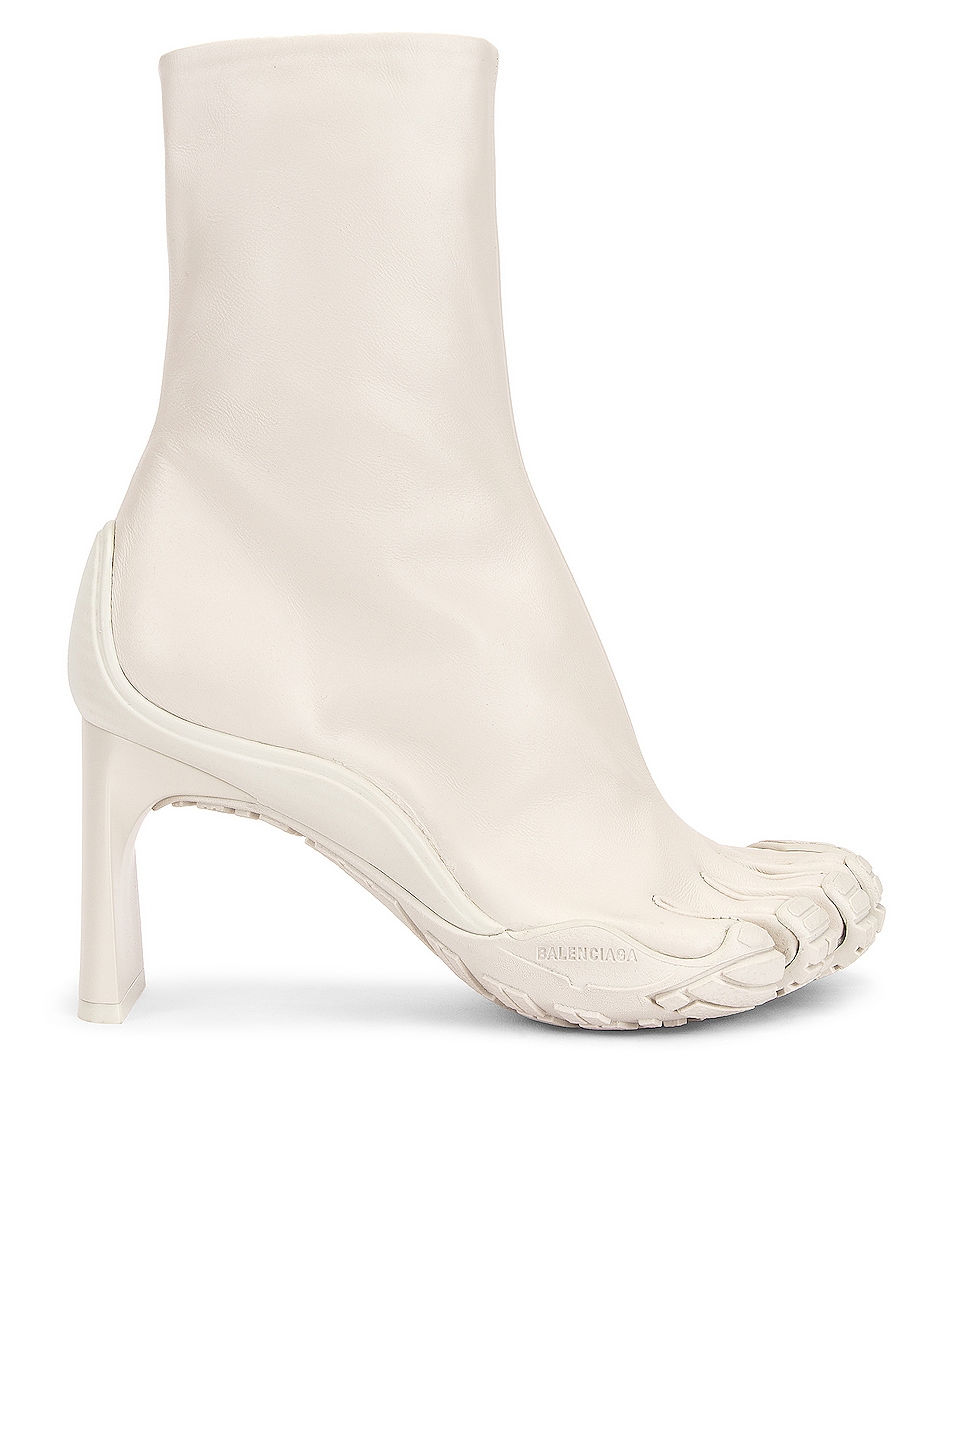 Image 1 of Balenciaga Heeled Toe Boots in Chalky White